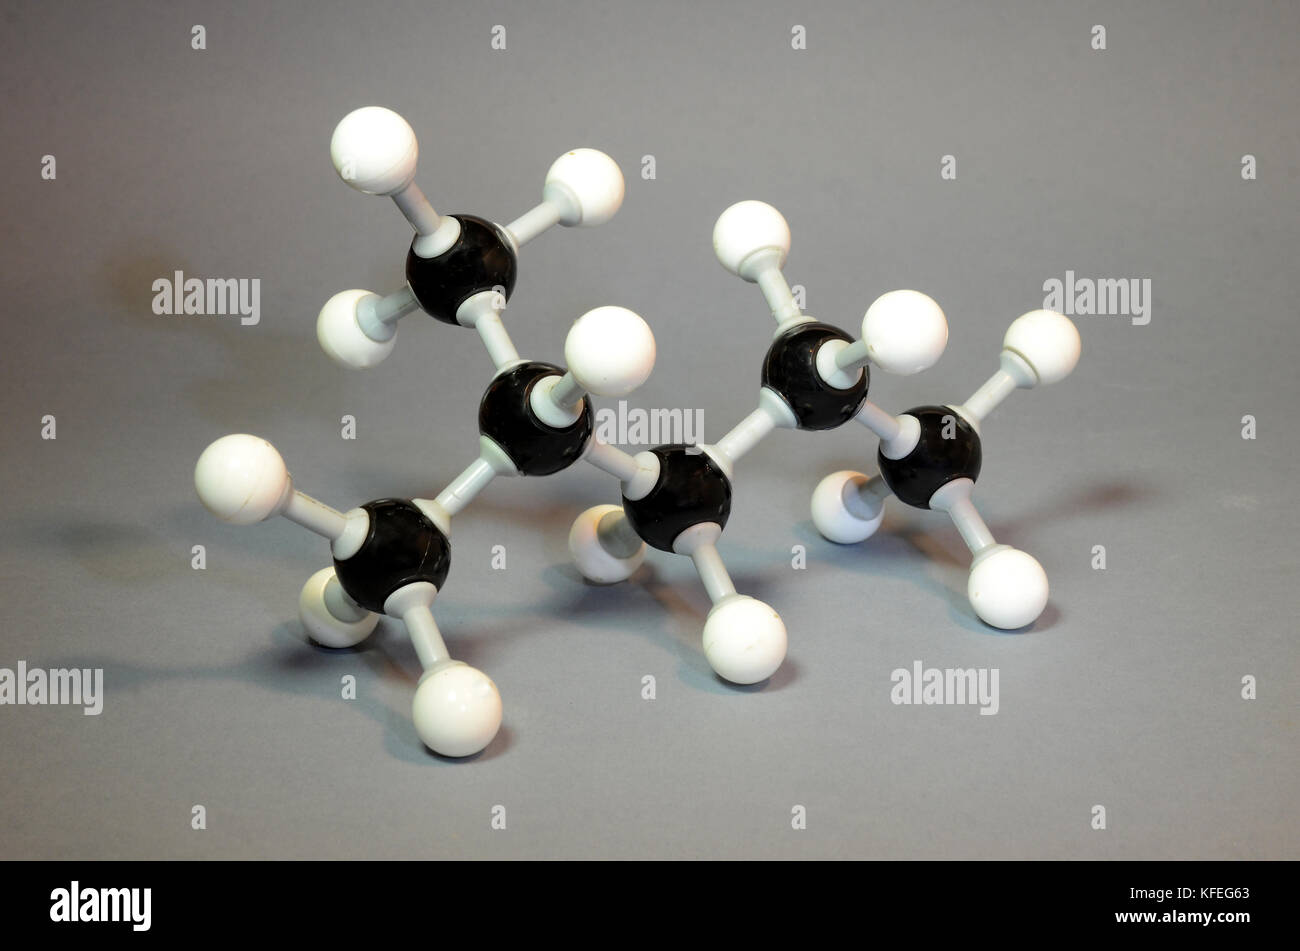 Molecule model of Pentane ('isohexane') with a single CH3 branched chain on the second carbon atom. Stock Photo